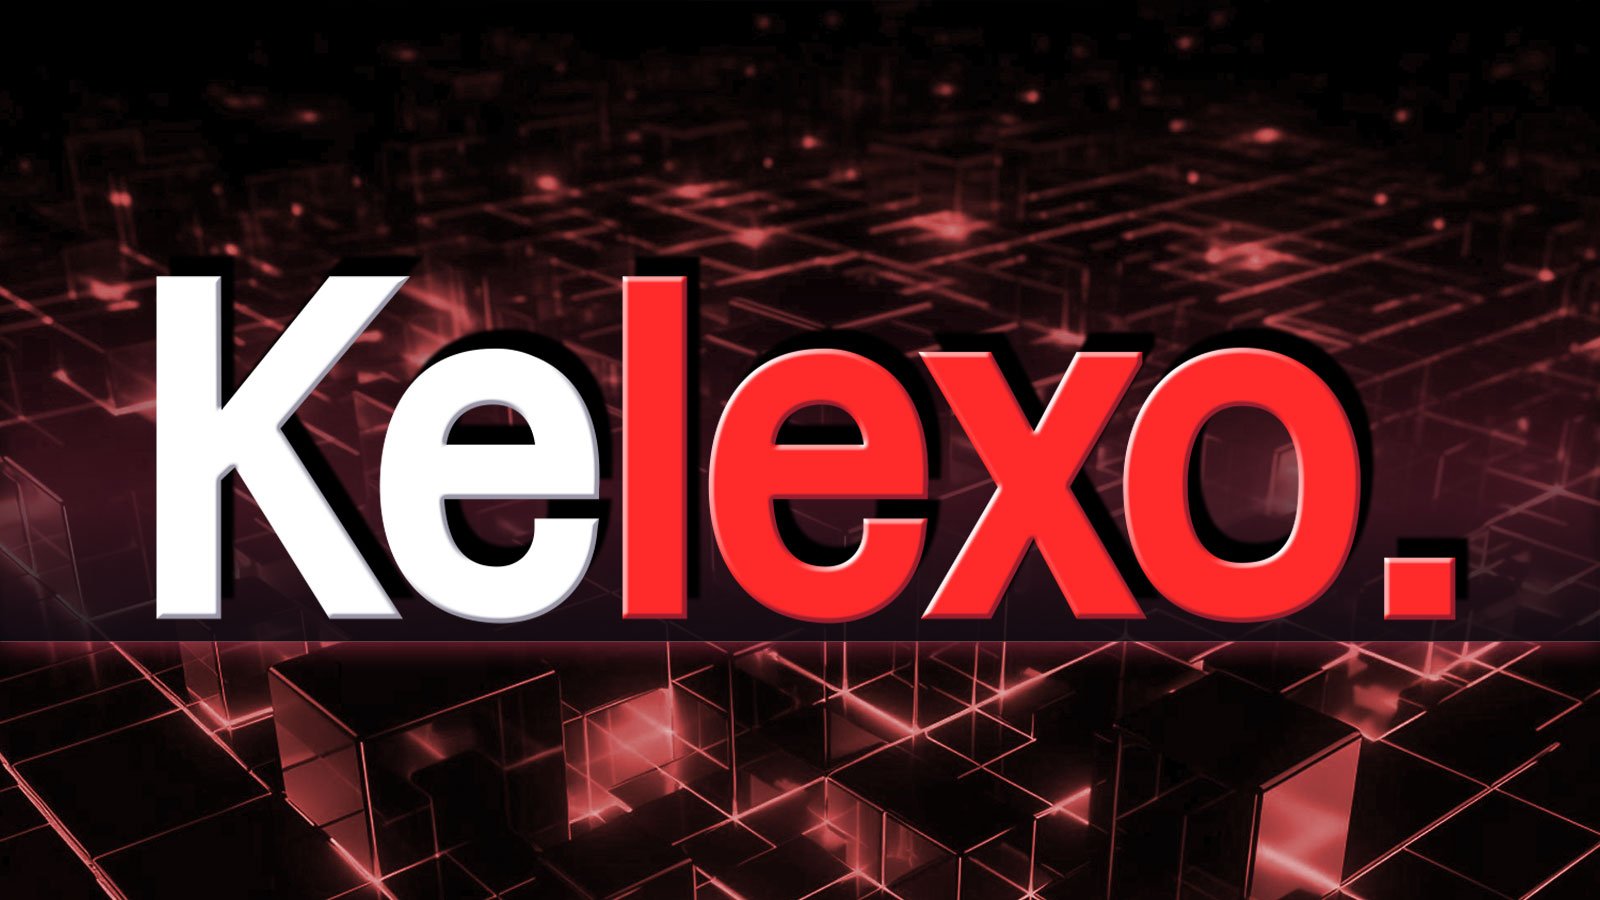 Kelexo (KLXO) Many-Phase Cryptocurrency Token Sale Garners Attention in March as Bnance Coin (BNB), Litecoin (LTC) Altcoin Majors Surge Again